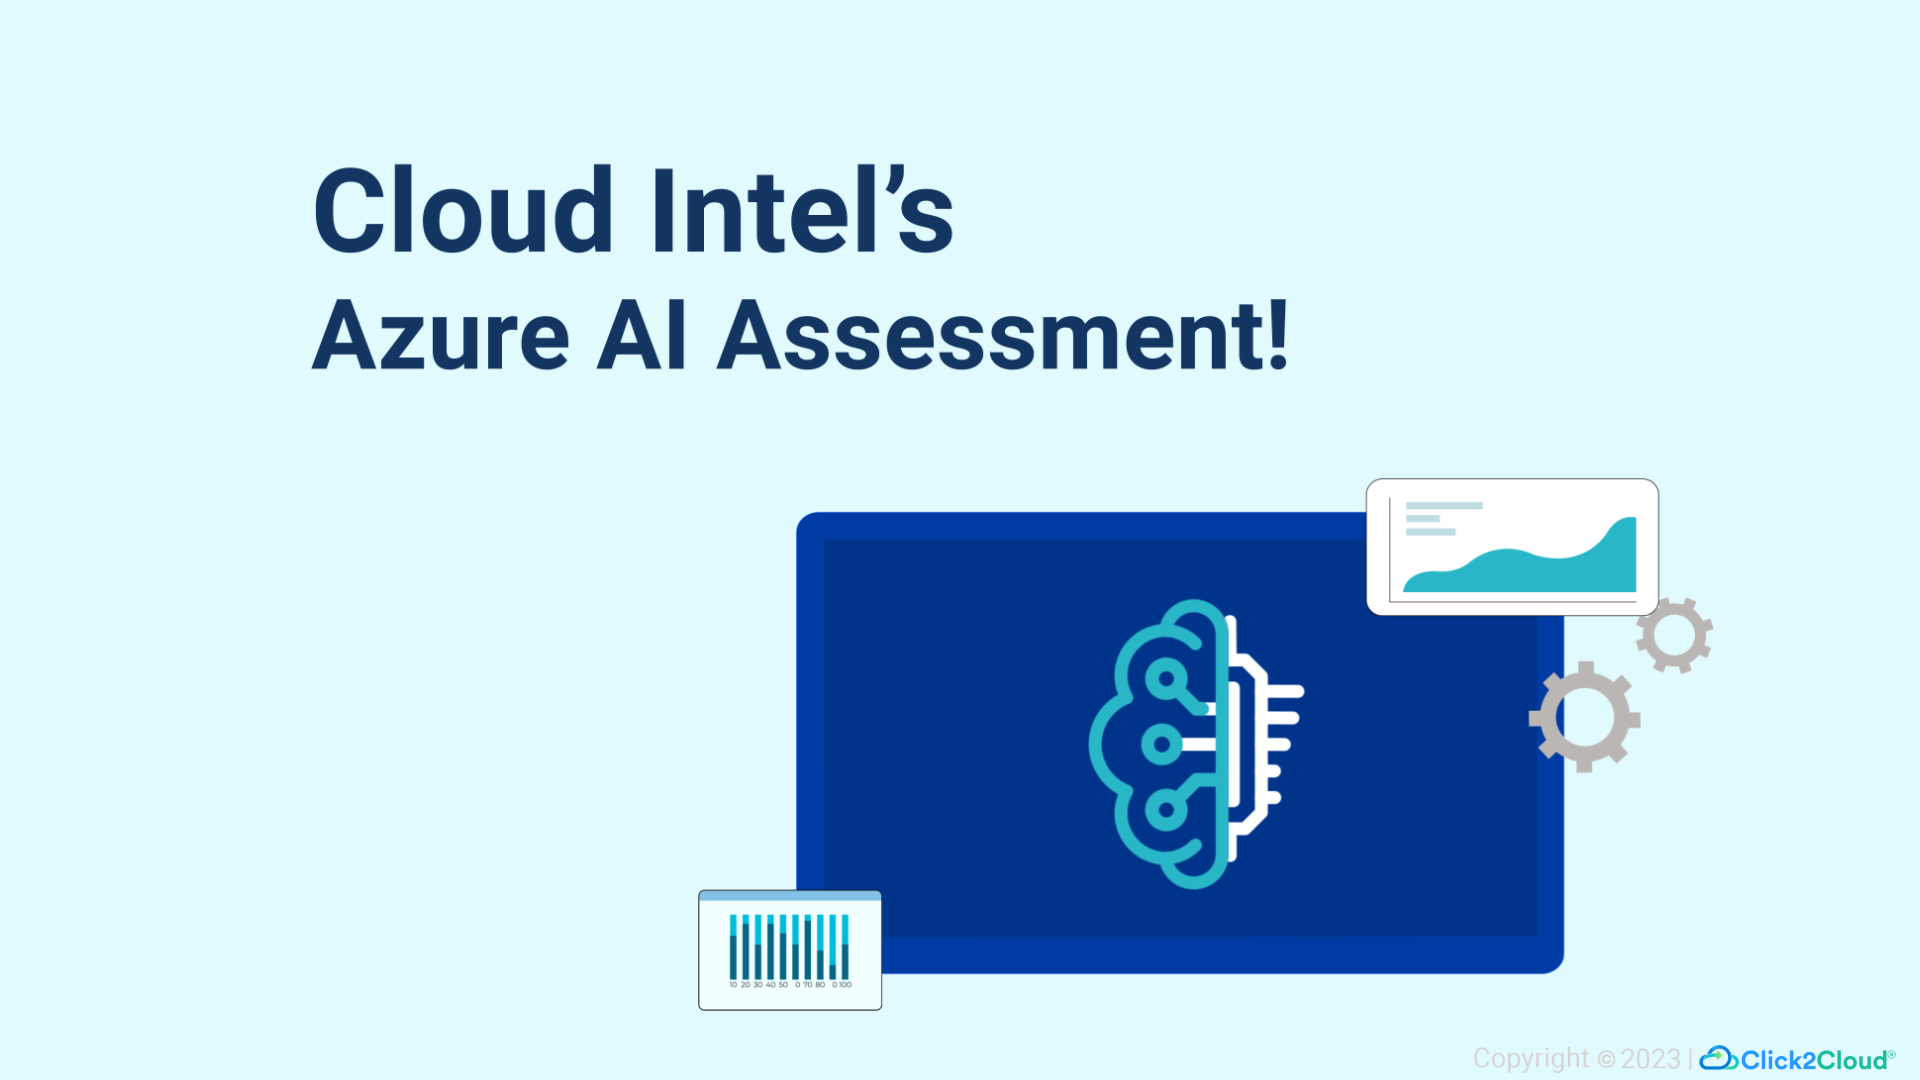 Forge the Future Faster with Cloud Intel’s Azure AI Assessment-Click2Cloud